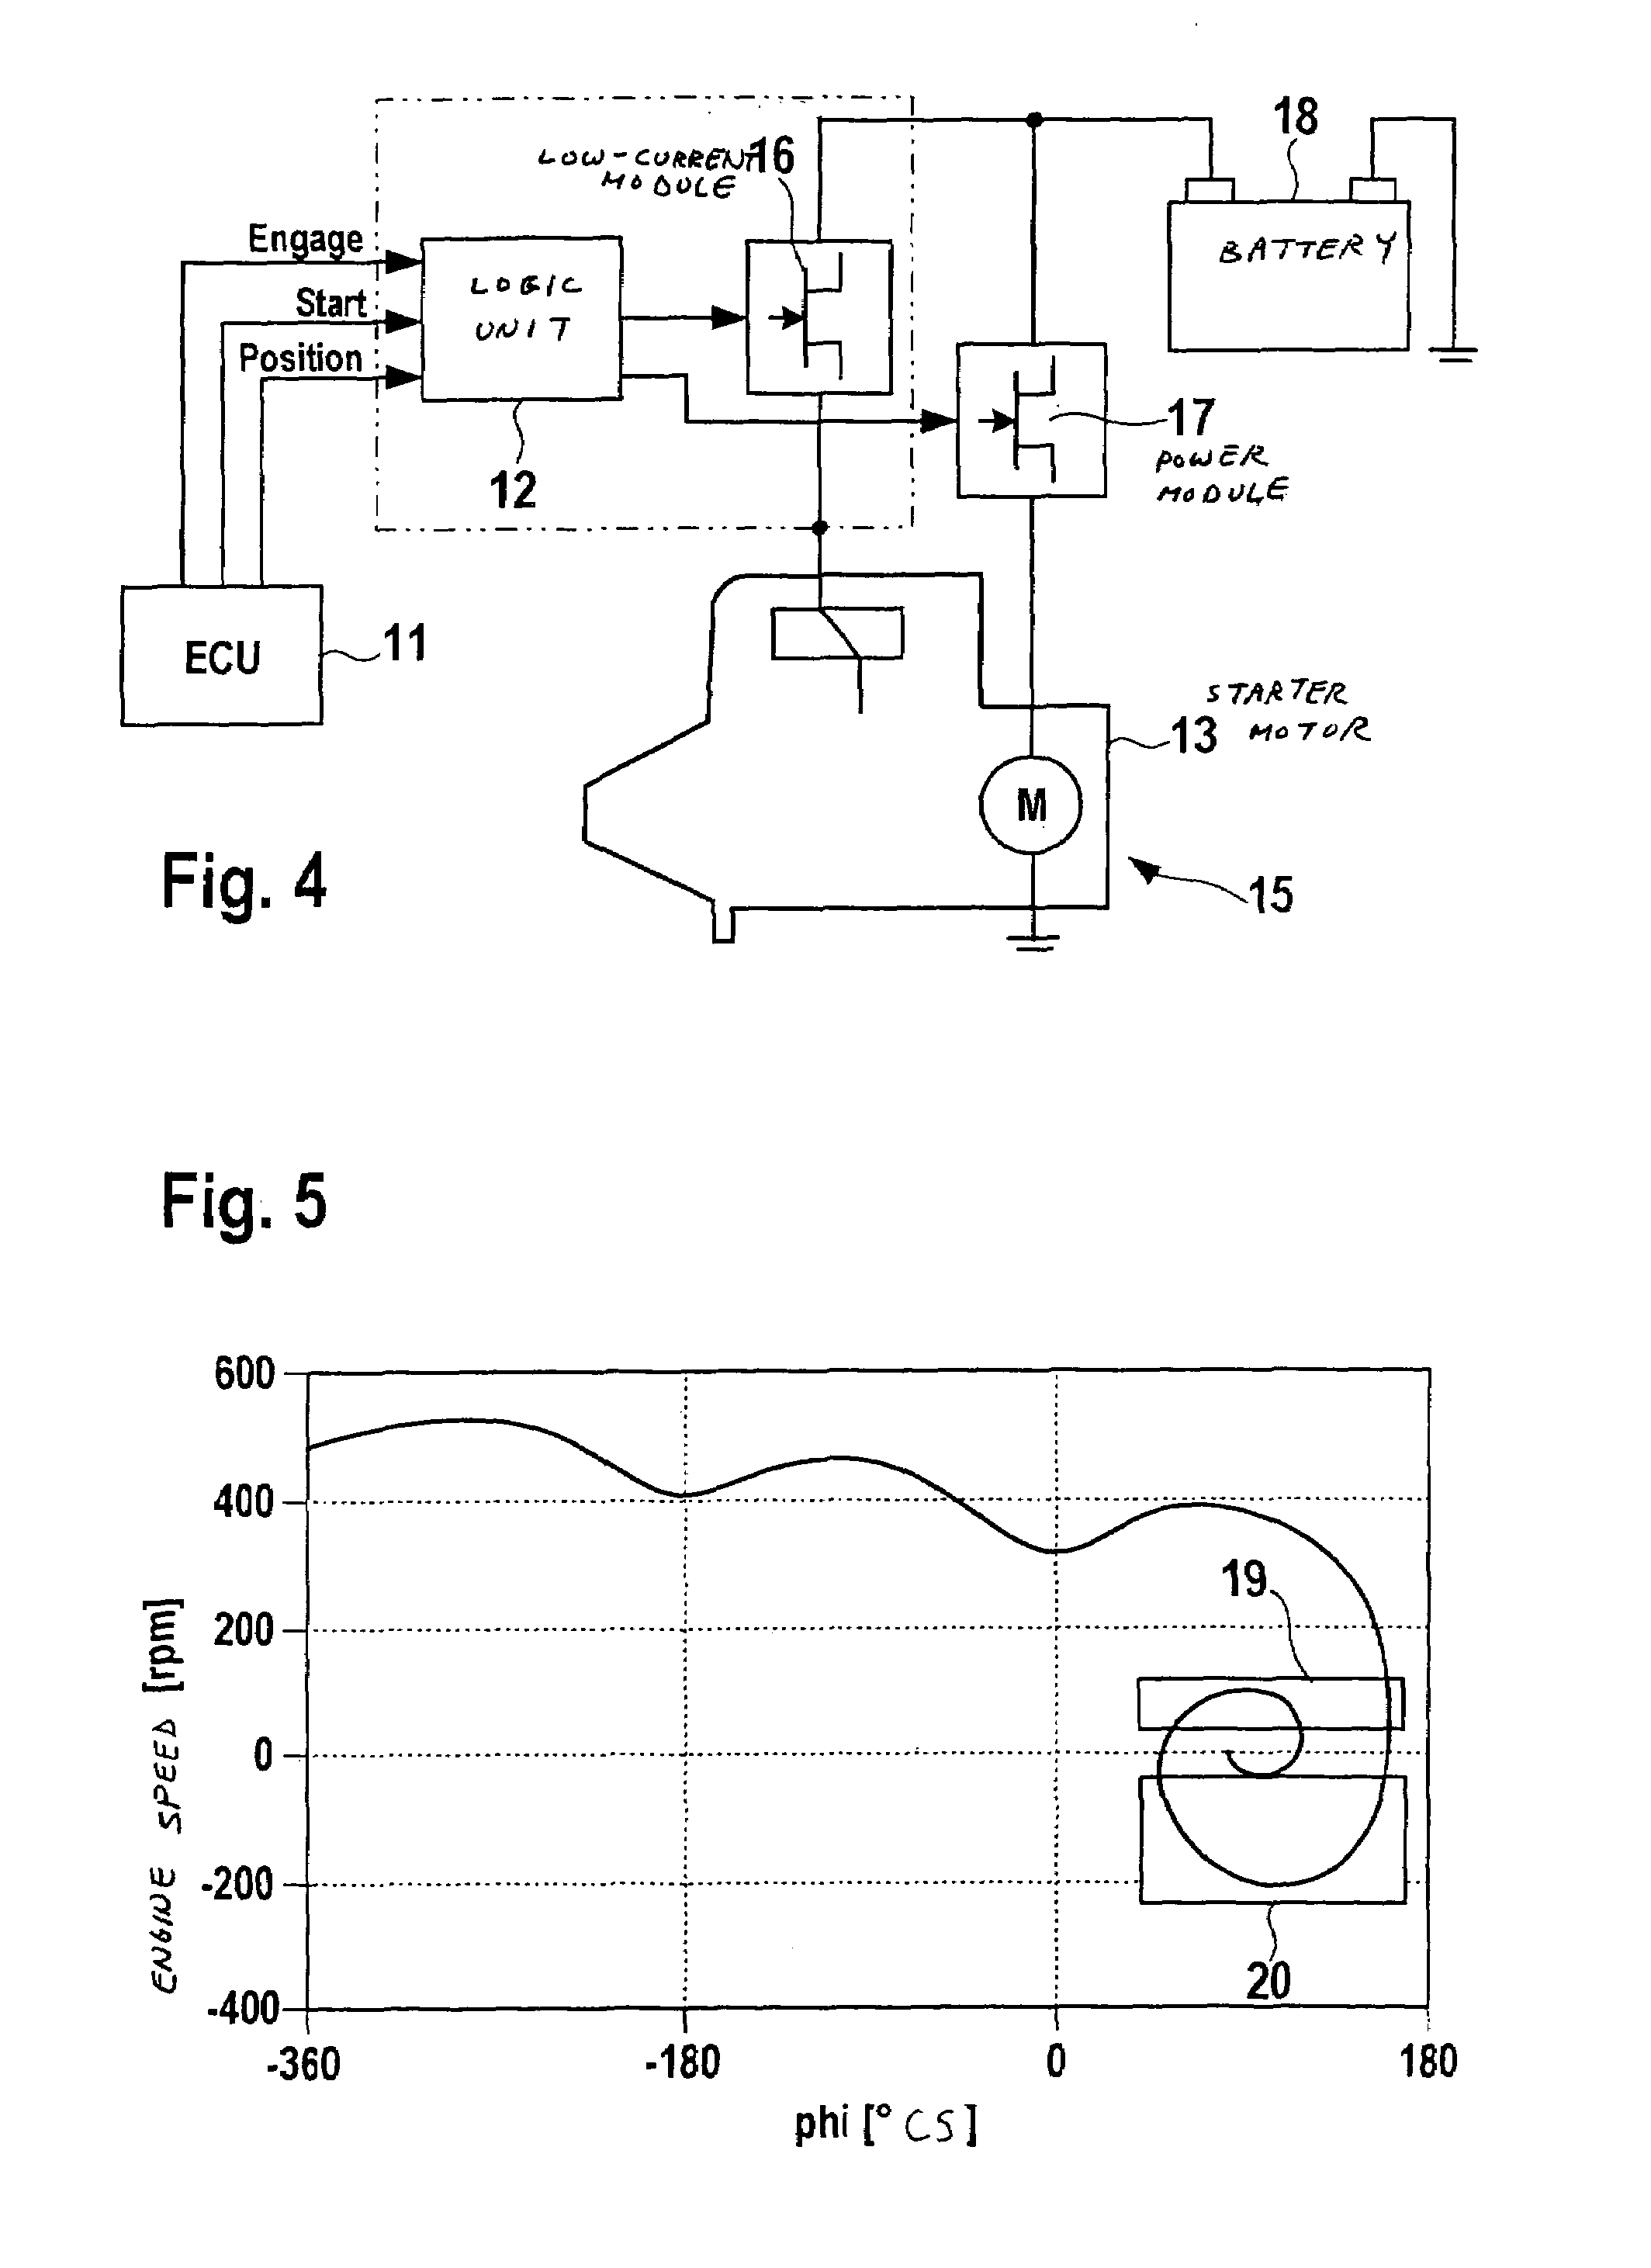 Method for engaging the starter pinion of a starter with the starter ring gear of an internal combustion engine during the running-down of the internal combustion engine